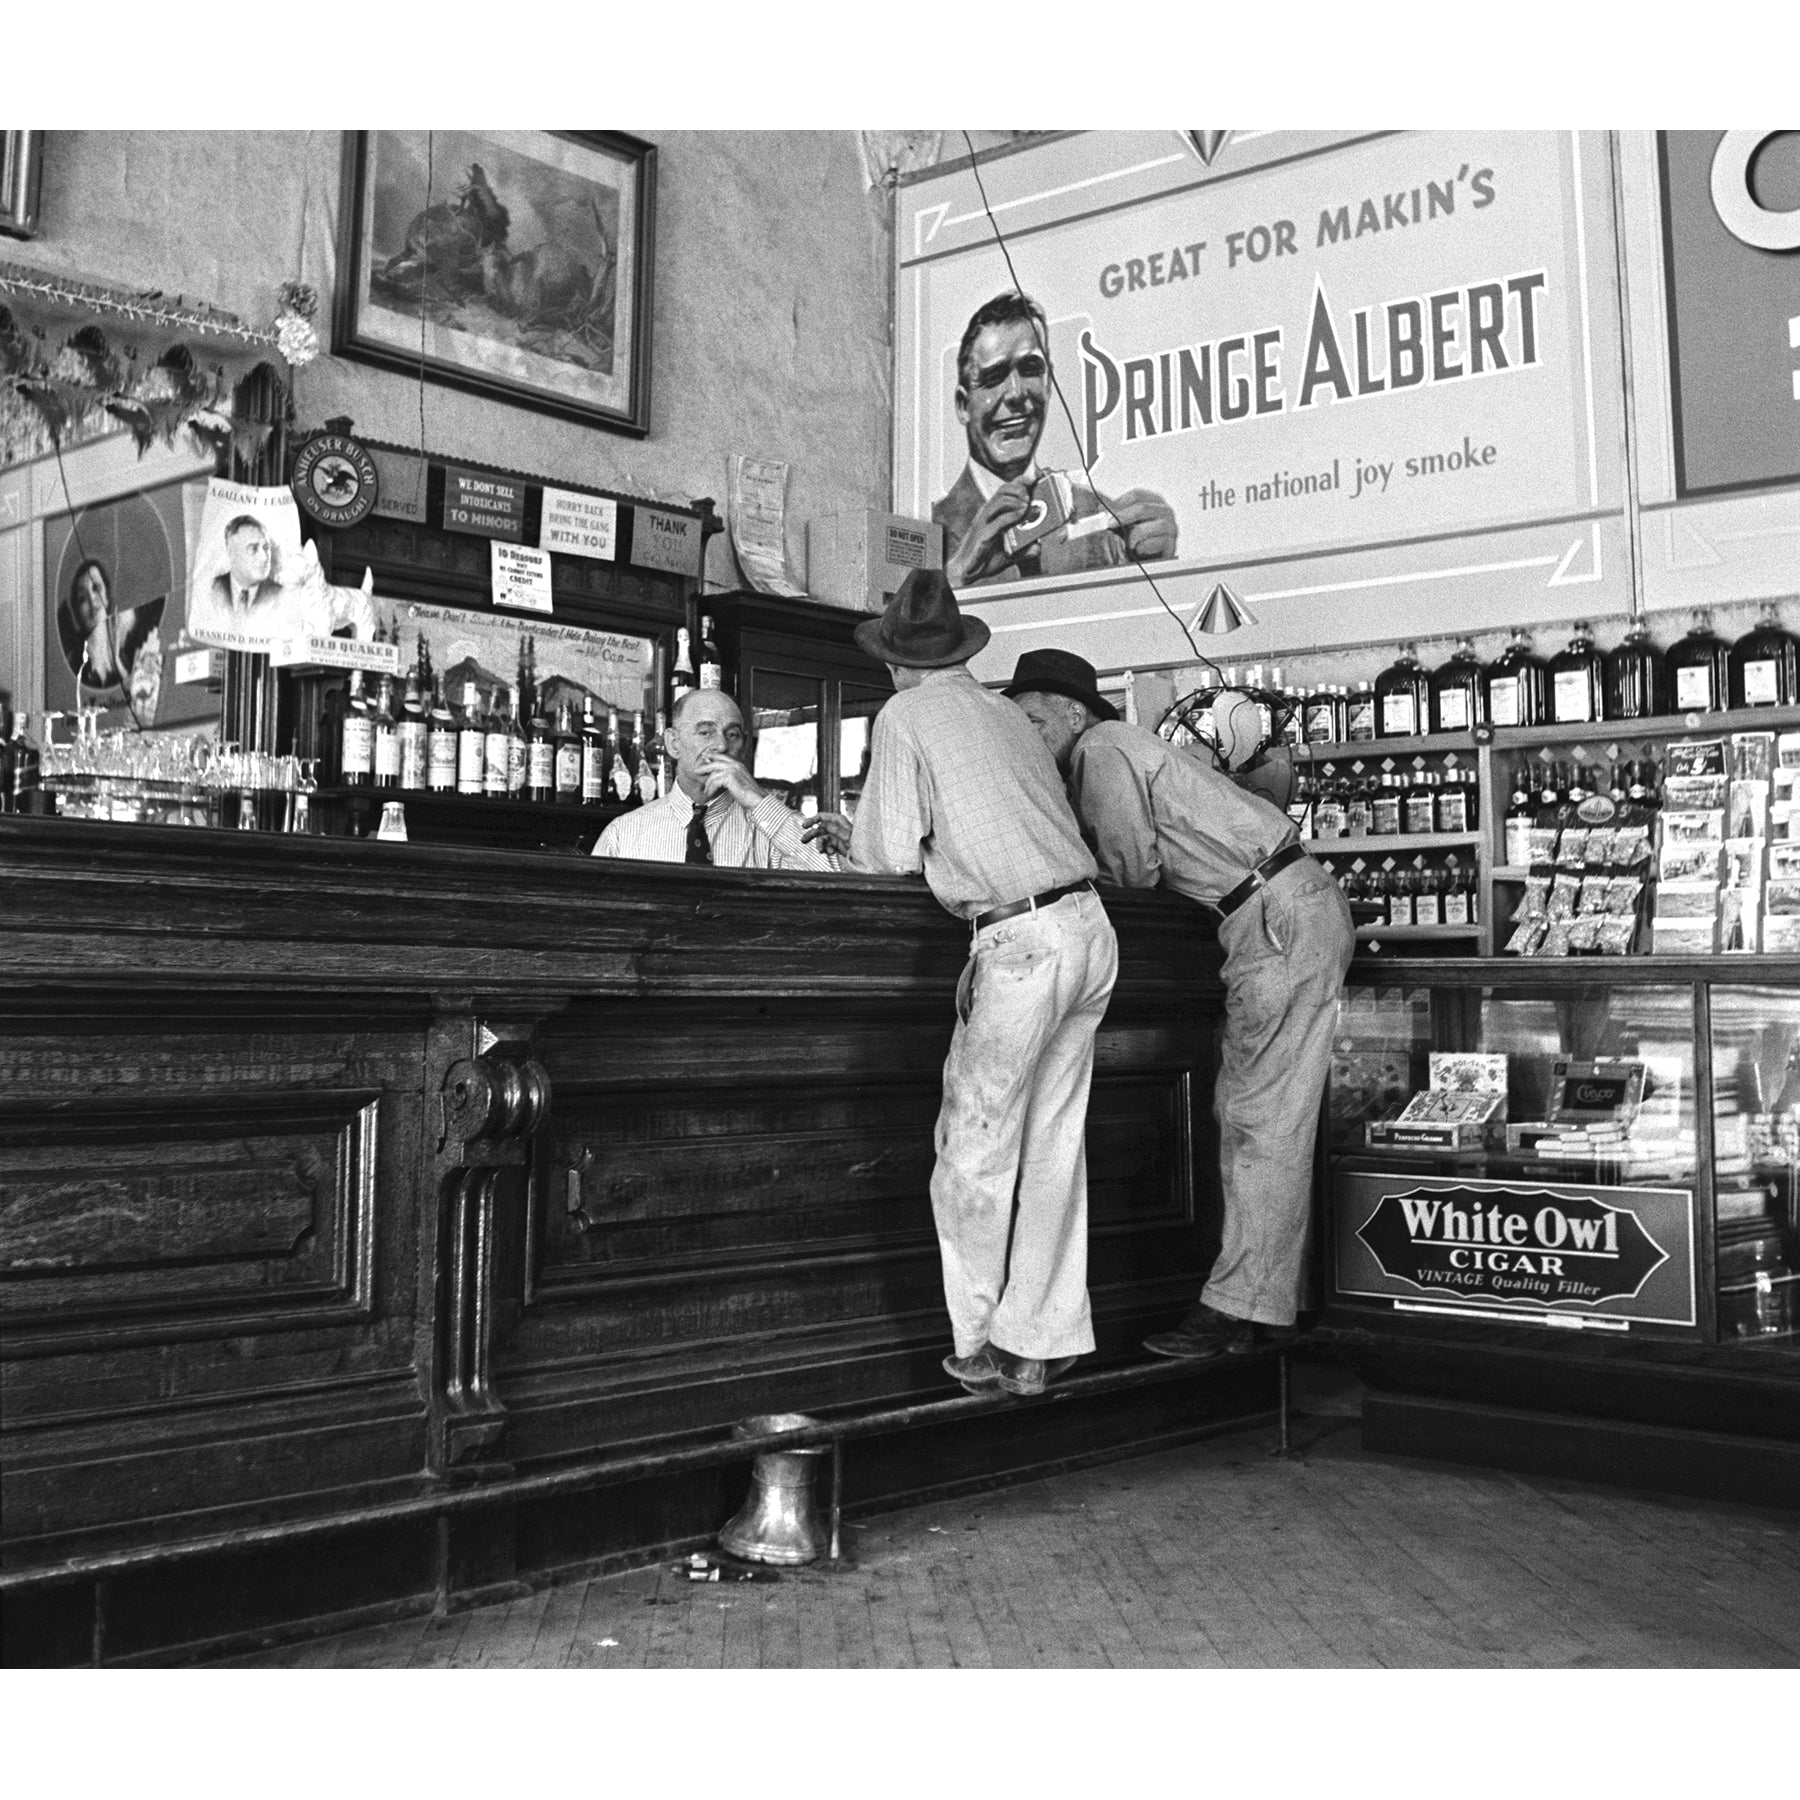 A vintage photograph of two men at the bar in a Saloon in Tombstone, Arizona